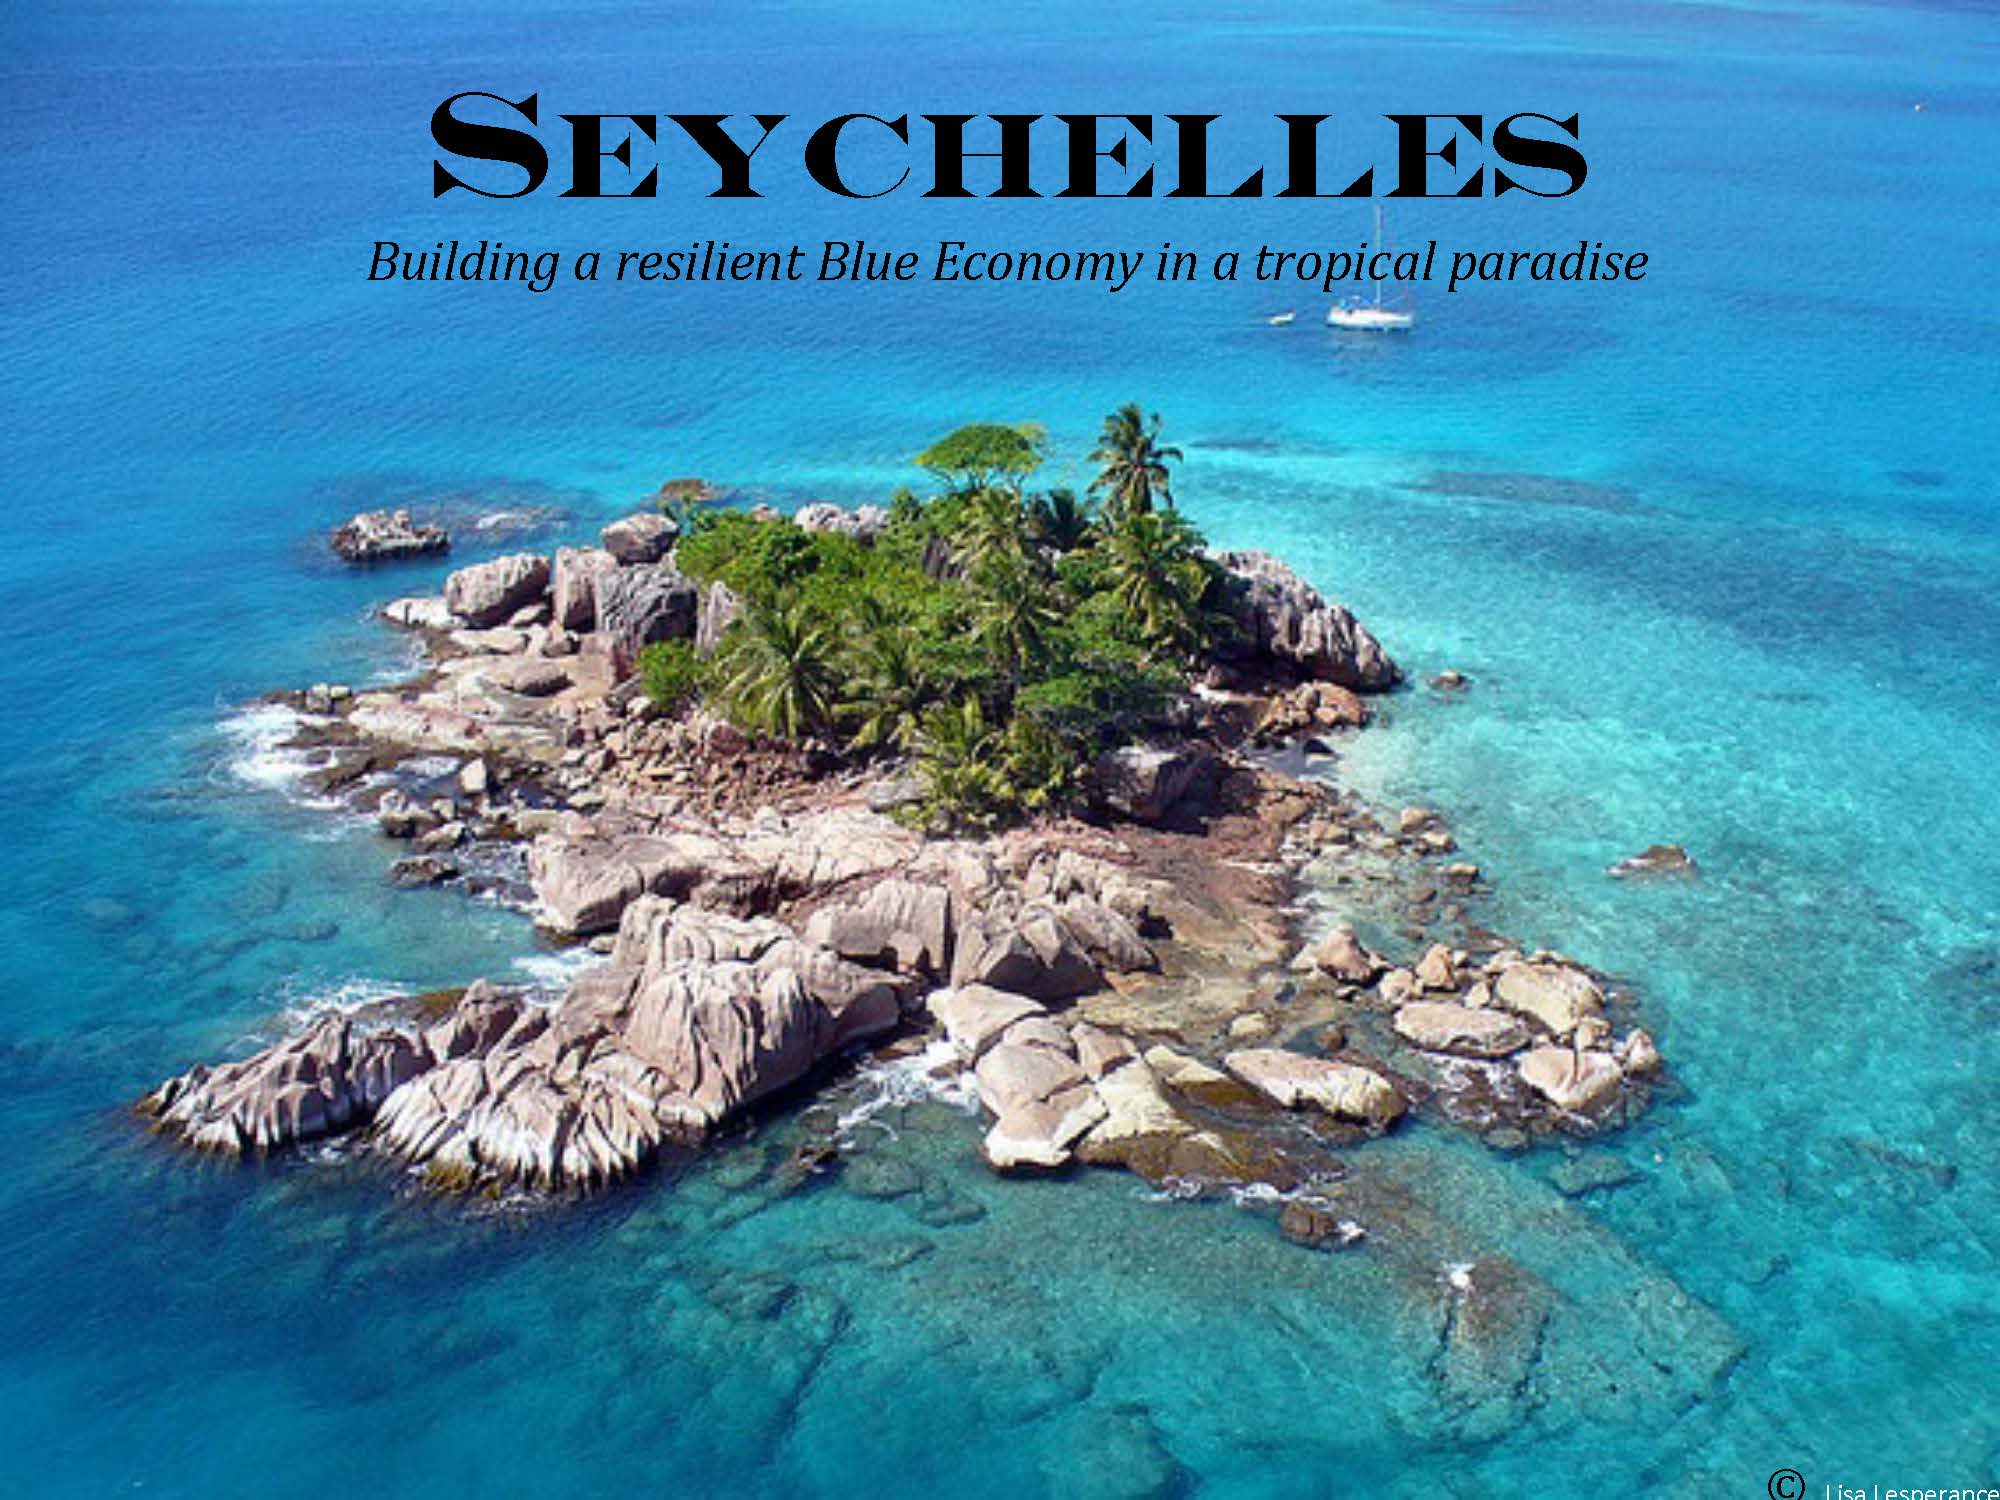 Investing in Seychelles' Blue Future